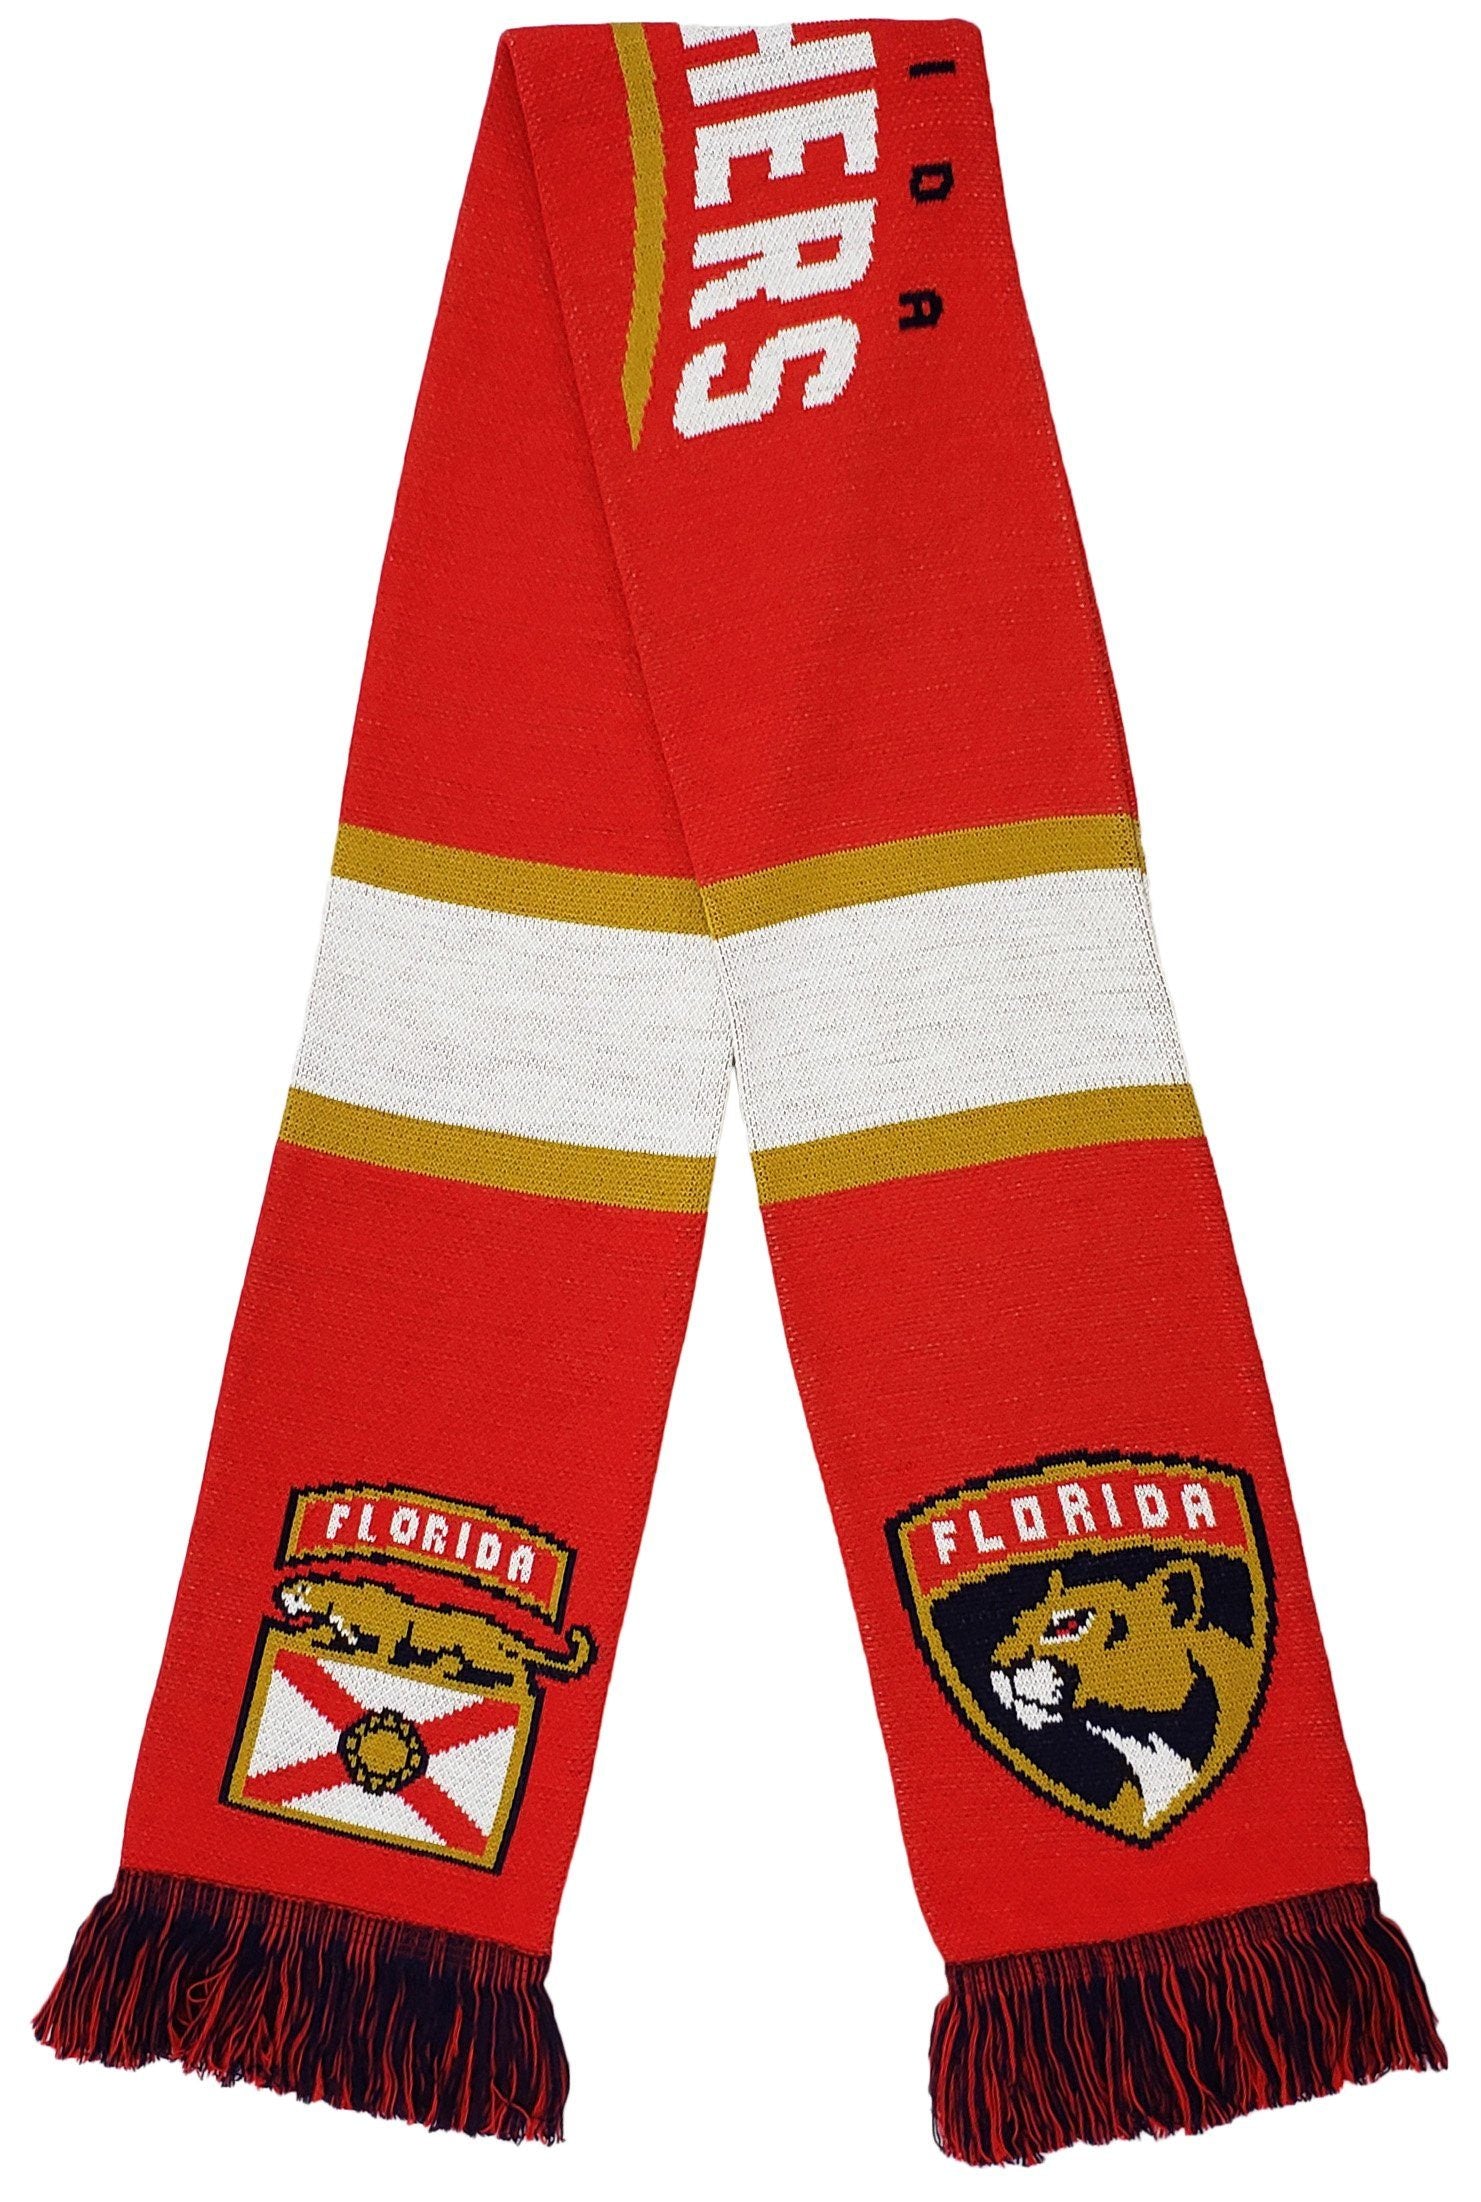 FLORIDA PANTHERS SCARF - Home Jersey